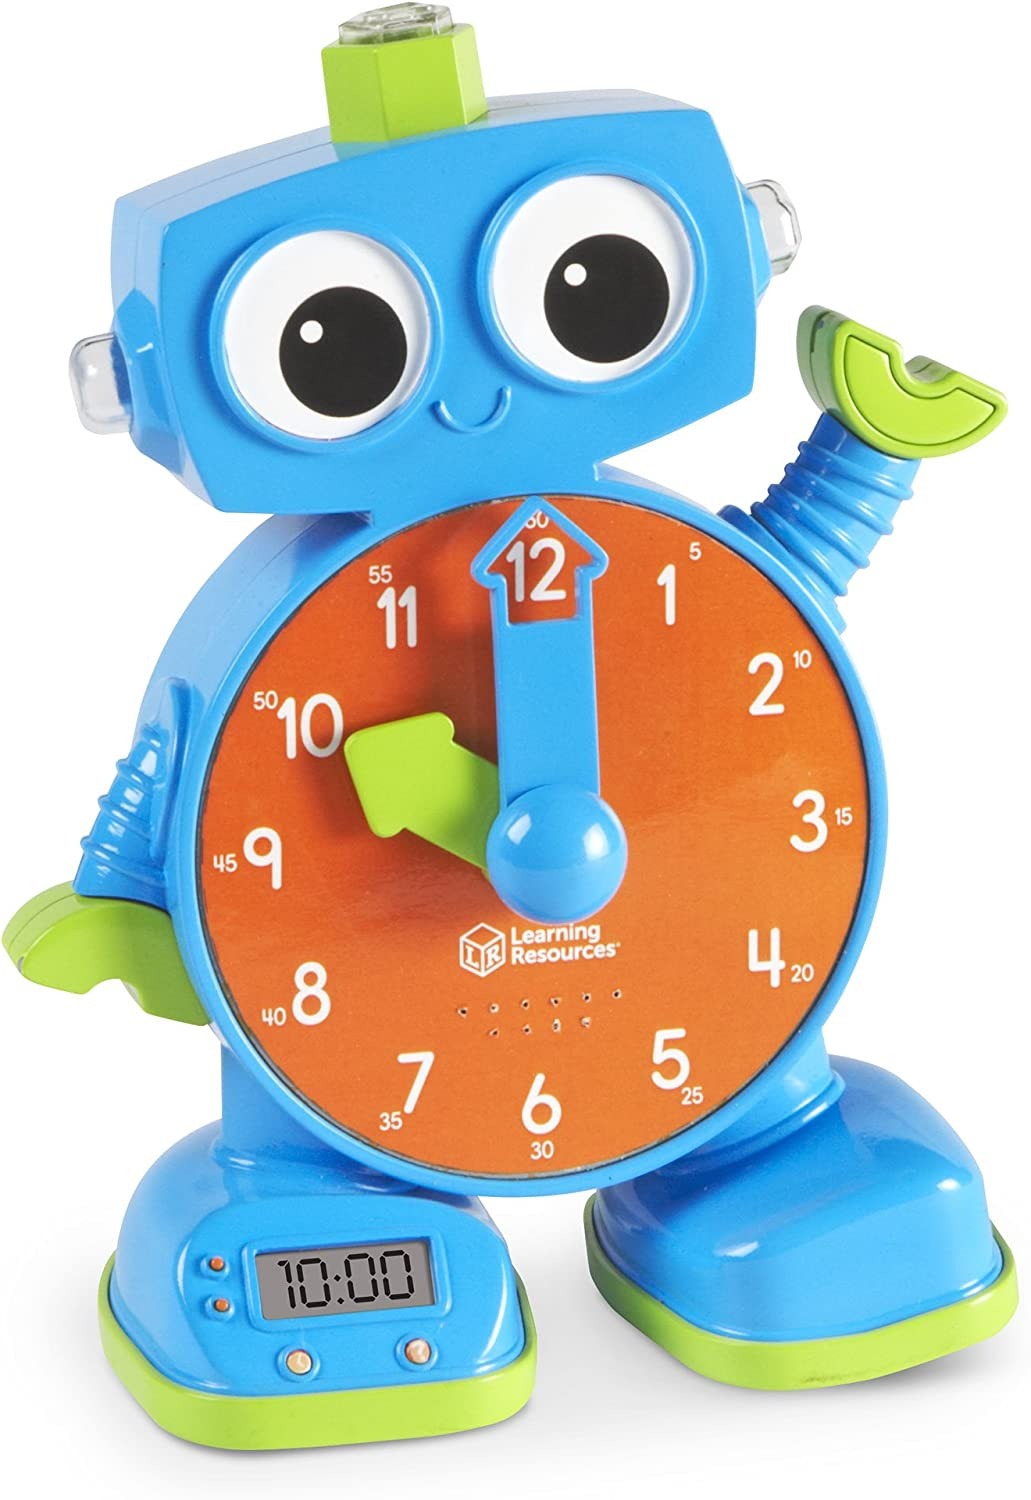 Tock the Learning Clock, Master early time skills with Tock the Learning Clock, this is a stylish and cute way to learn the time. Tock the Learning Clock helps children to learn how to tell the time in a fun and engaging way. Turn the clock hands and Tock the Learning Clock will announce the time like magic. Using Tock the Learning Clock c hildren can learn how to read both digital and analogue clocks Has two learning modes: Quiz Mode – Press the question mark to answer three time questions Music Mode – Pre